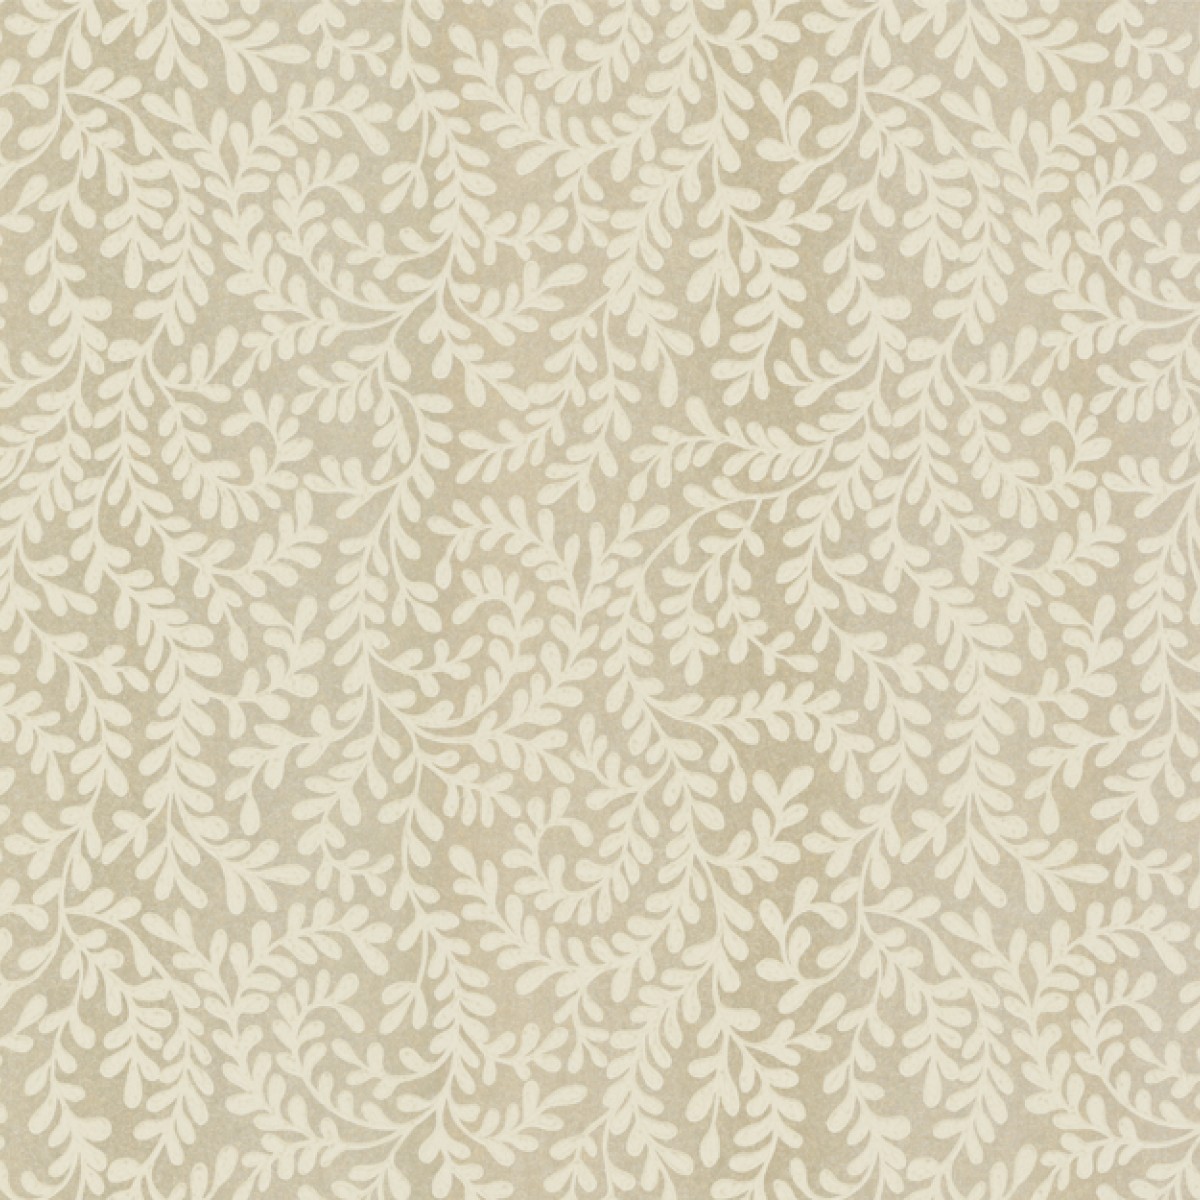 Tapet Audley, Taupe Metallic Luxury Leaf, 1838 Wallcoverings, 5.3mp / rola, Tapet living 